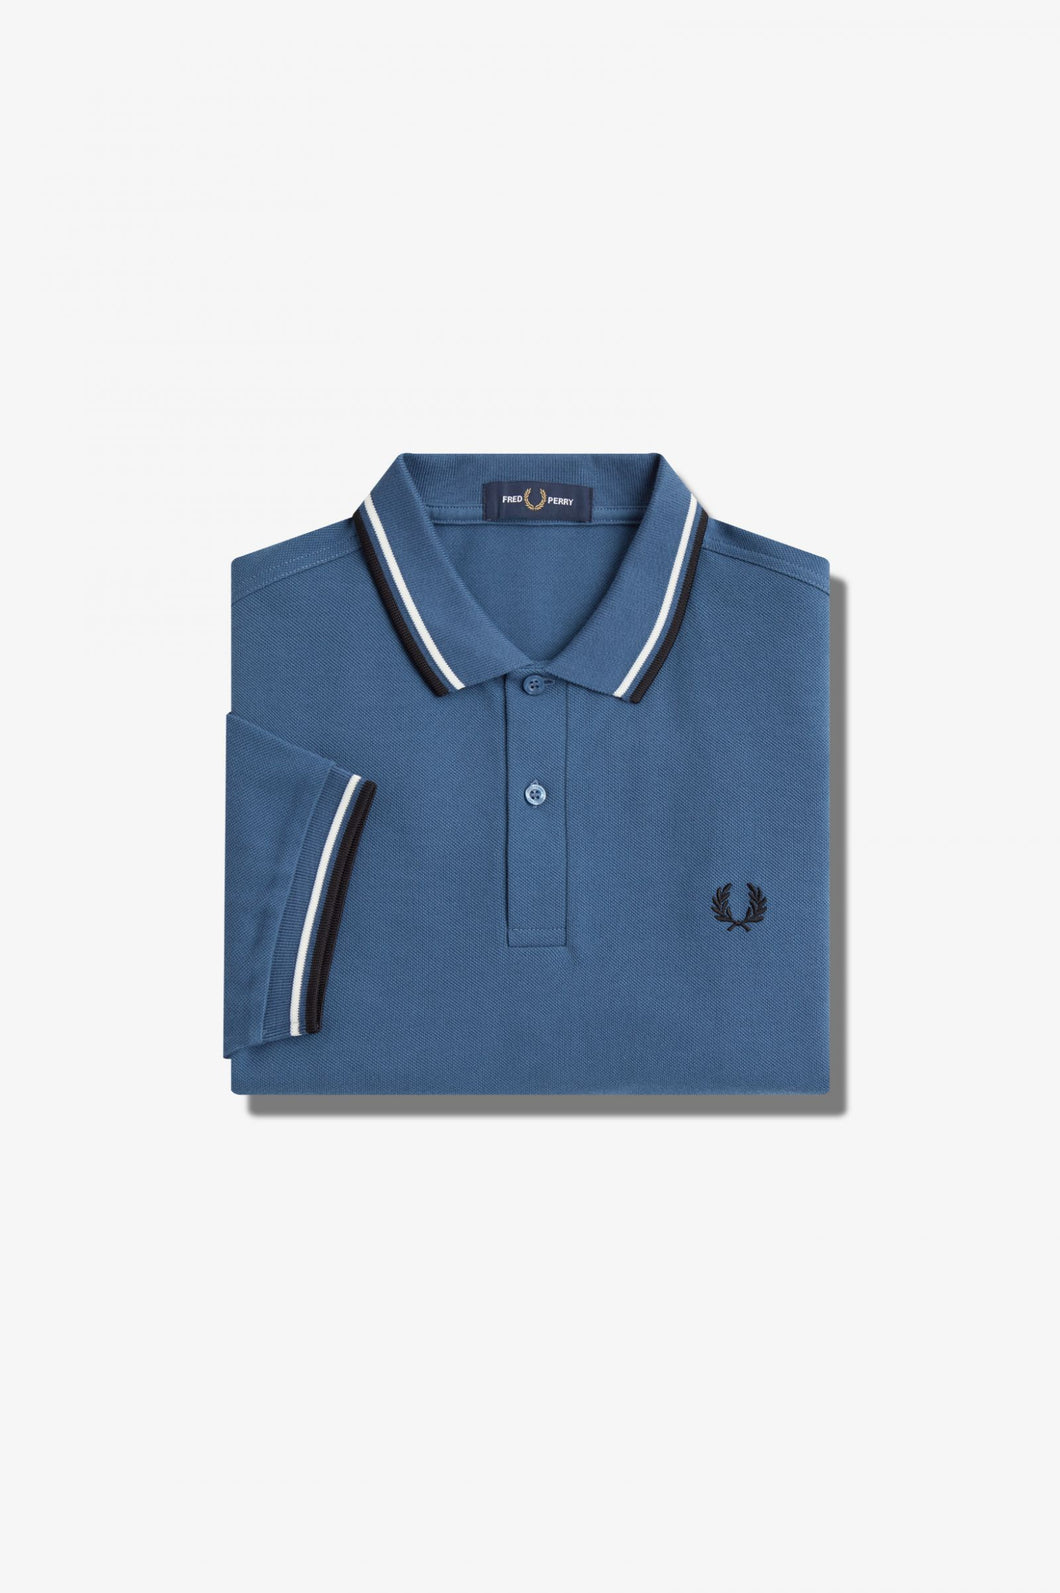 Fred Perry Midnight Blue polo with Snow White and Black Twin Tipping